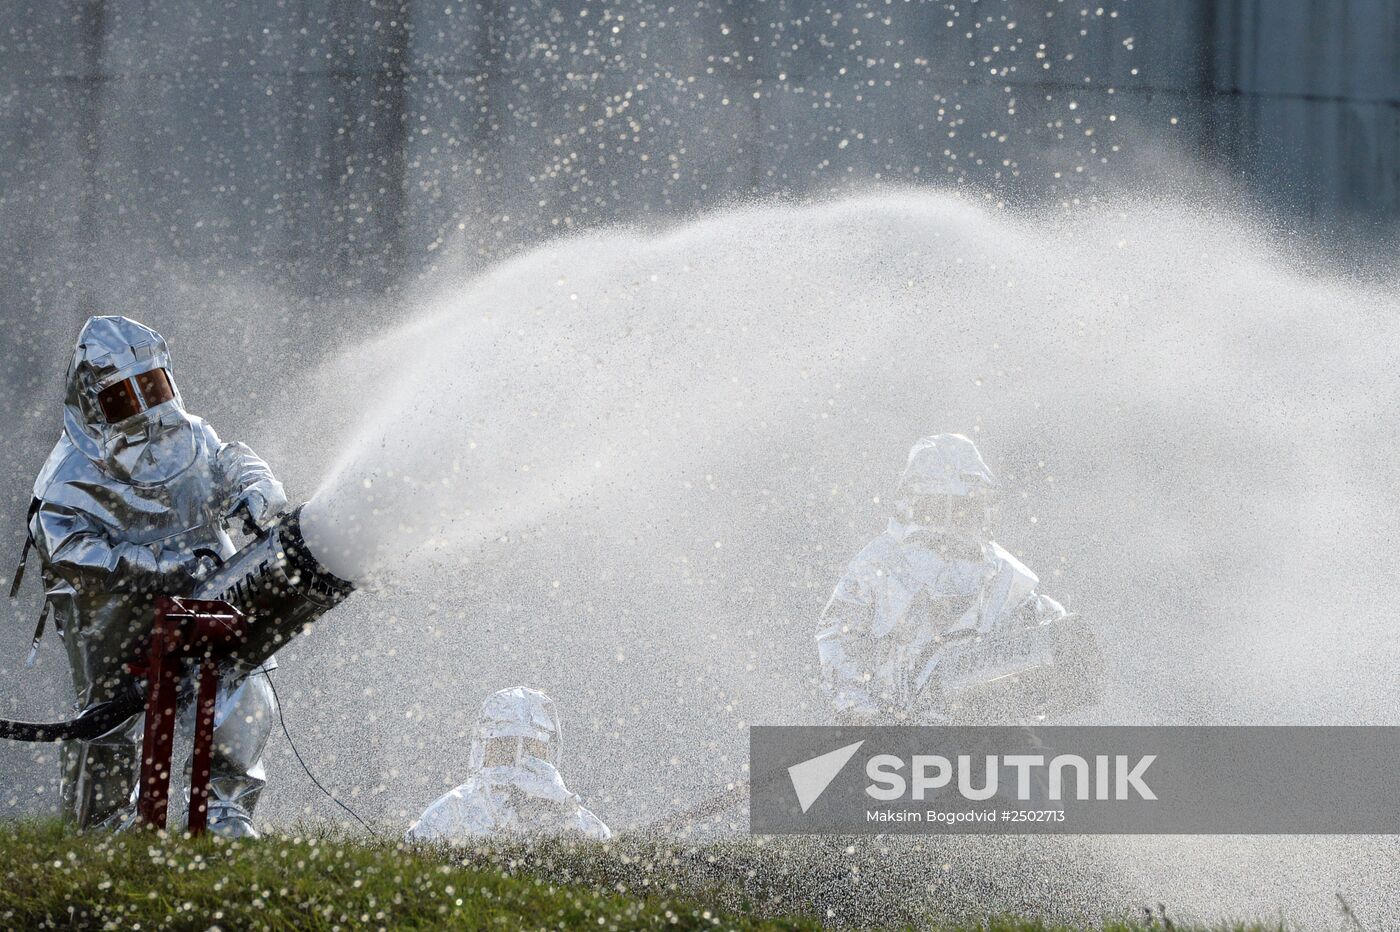 Firefighting drill at a petroleum storage facility in Kazan